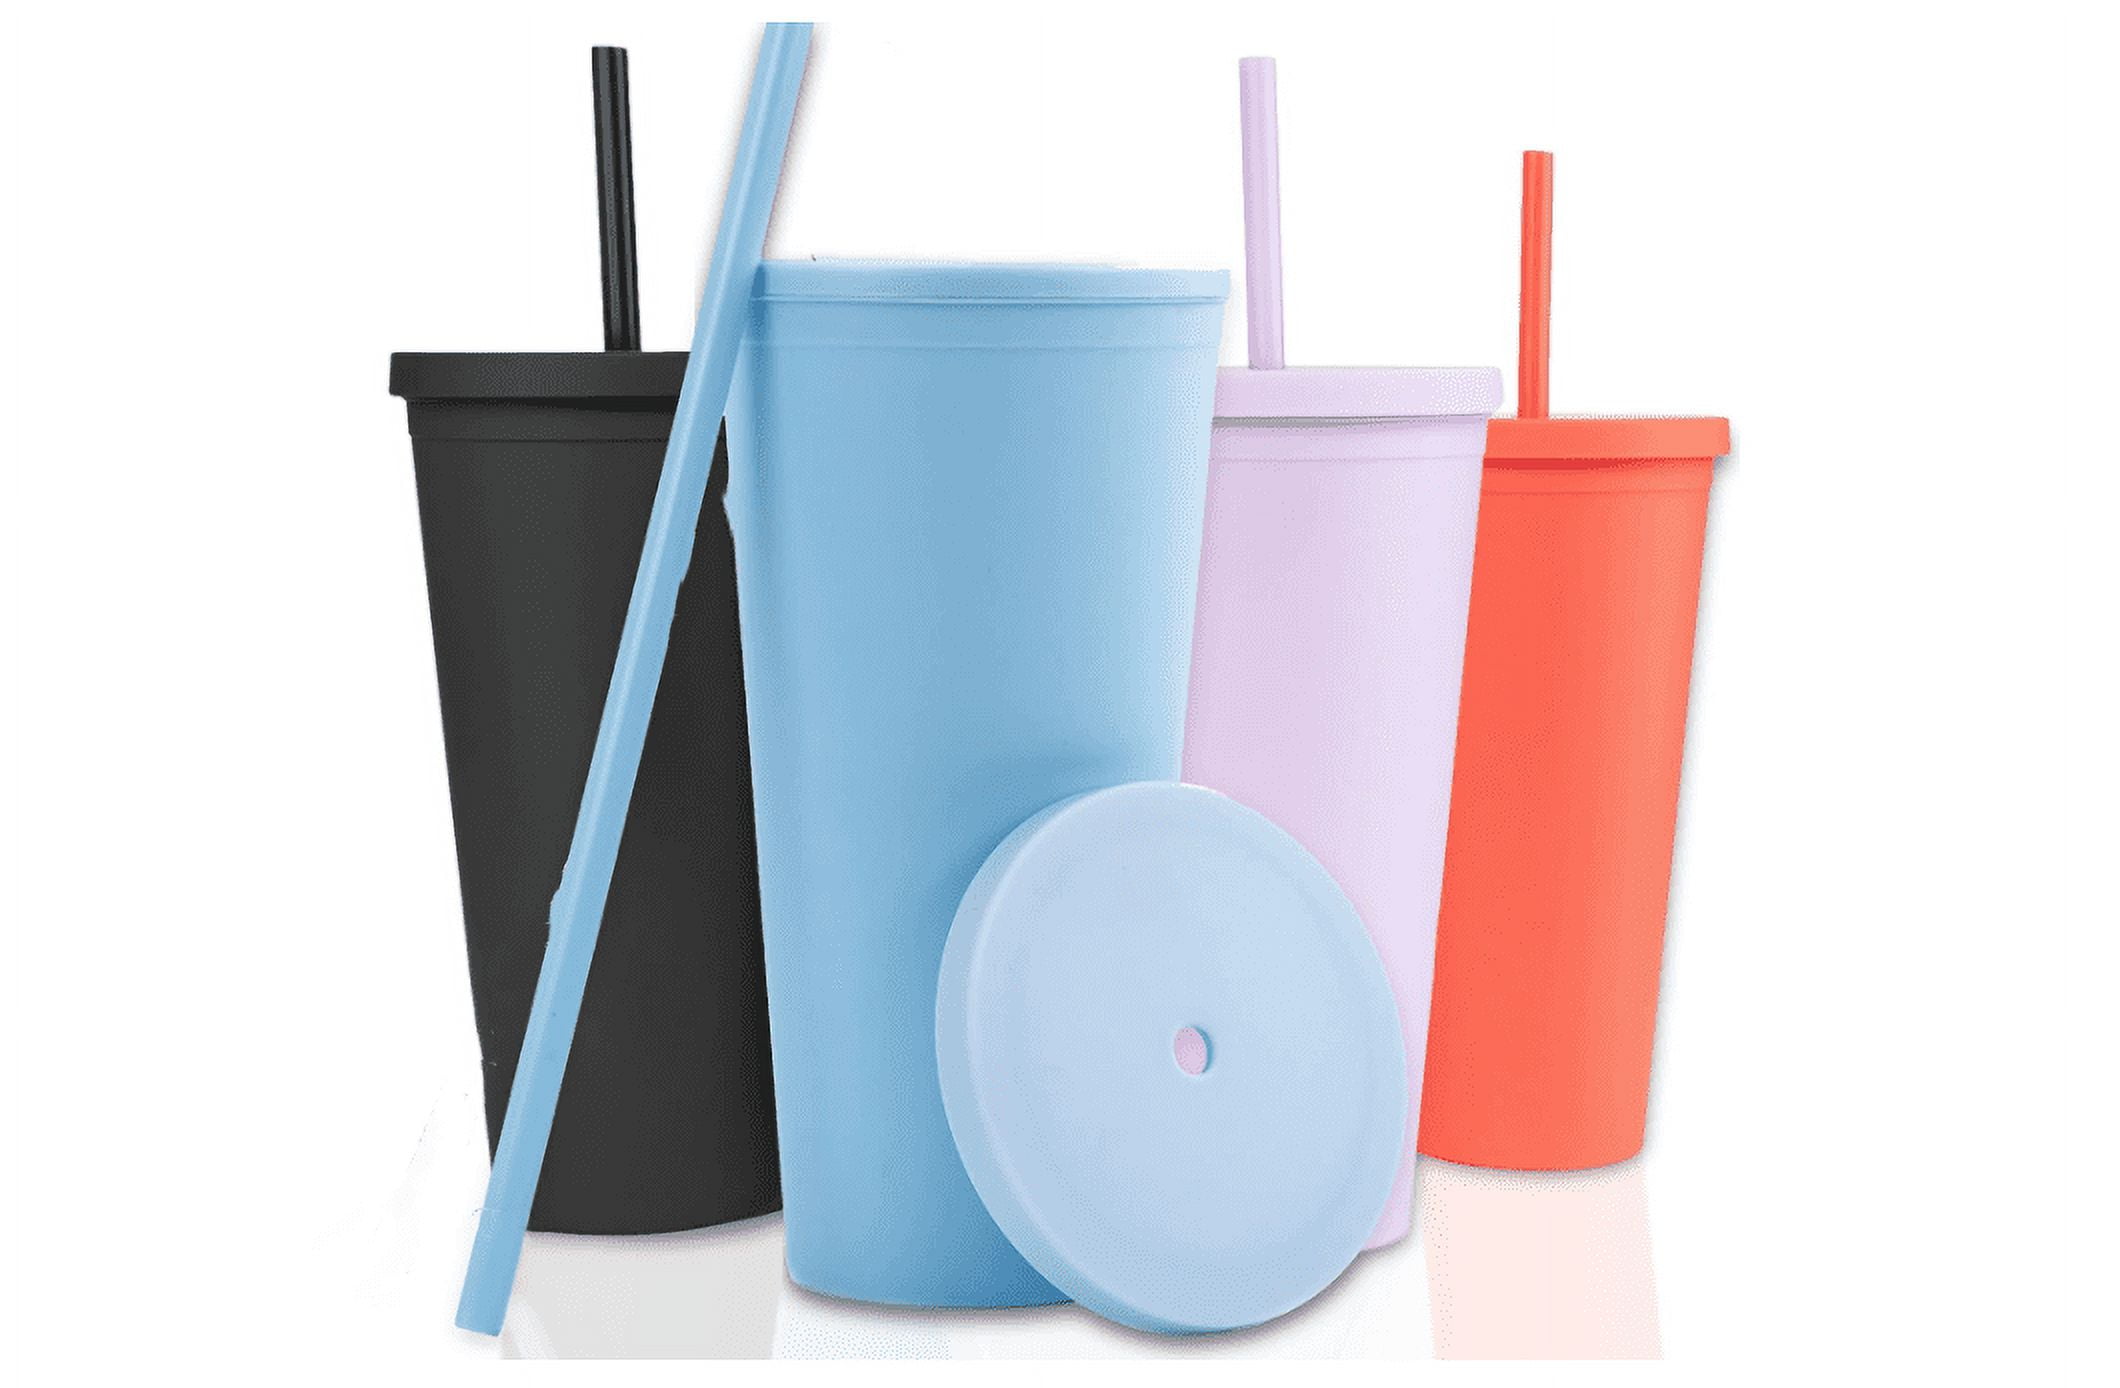 STRATA CUPS Multicolor Skinny Tumblers with Lids and Straws (12 pack) -  16oz Double Wall Acrylic Tumbler, Tall Matte Skinny Tumblers, Bulk with  Free